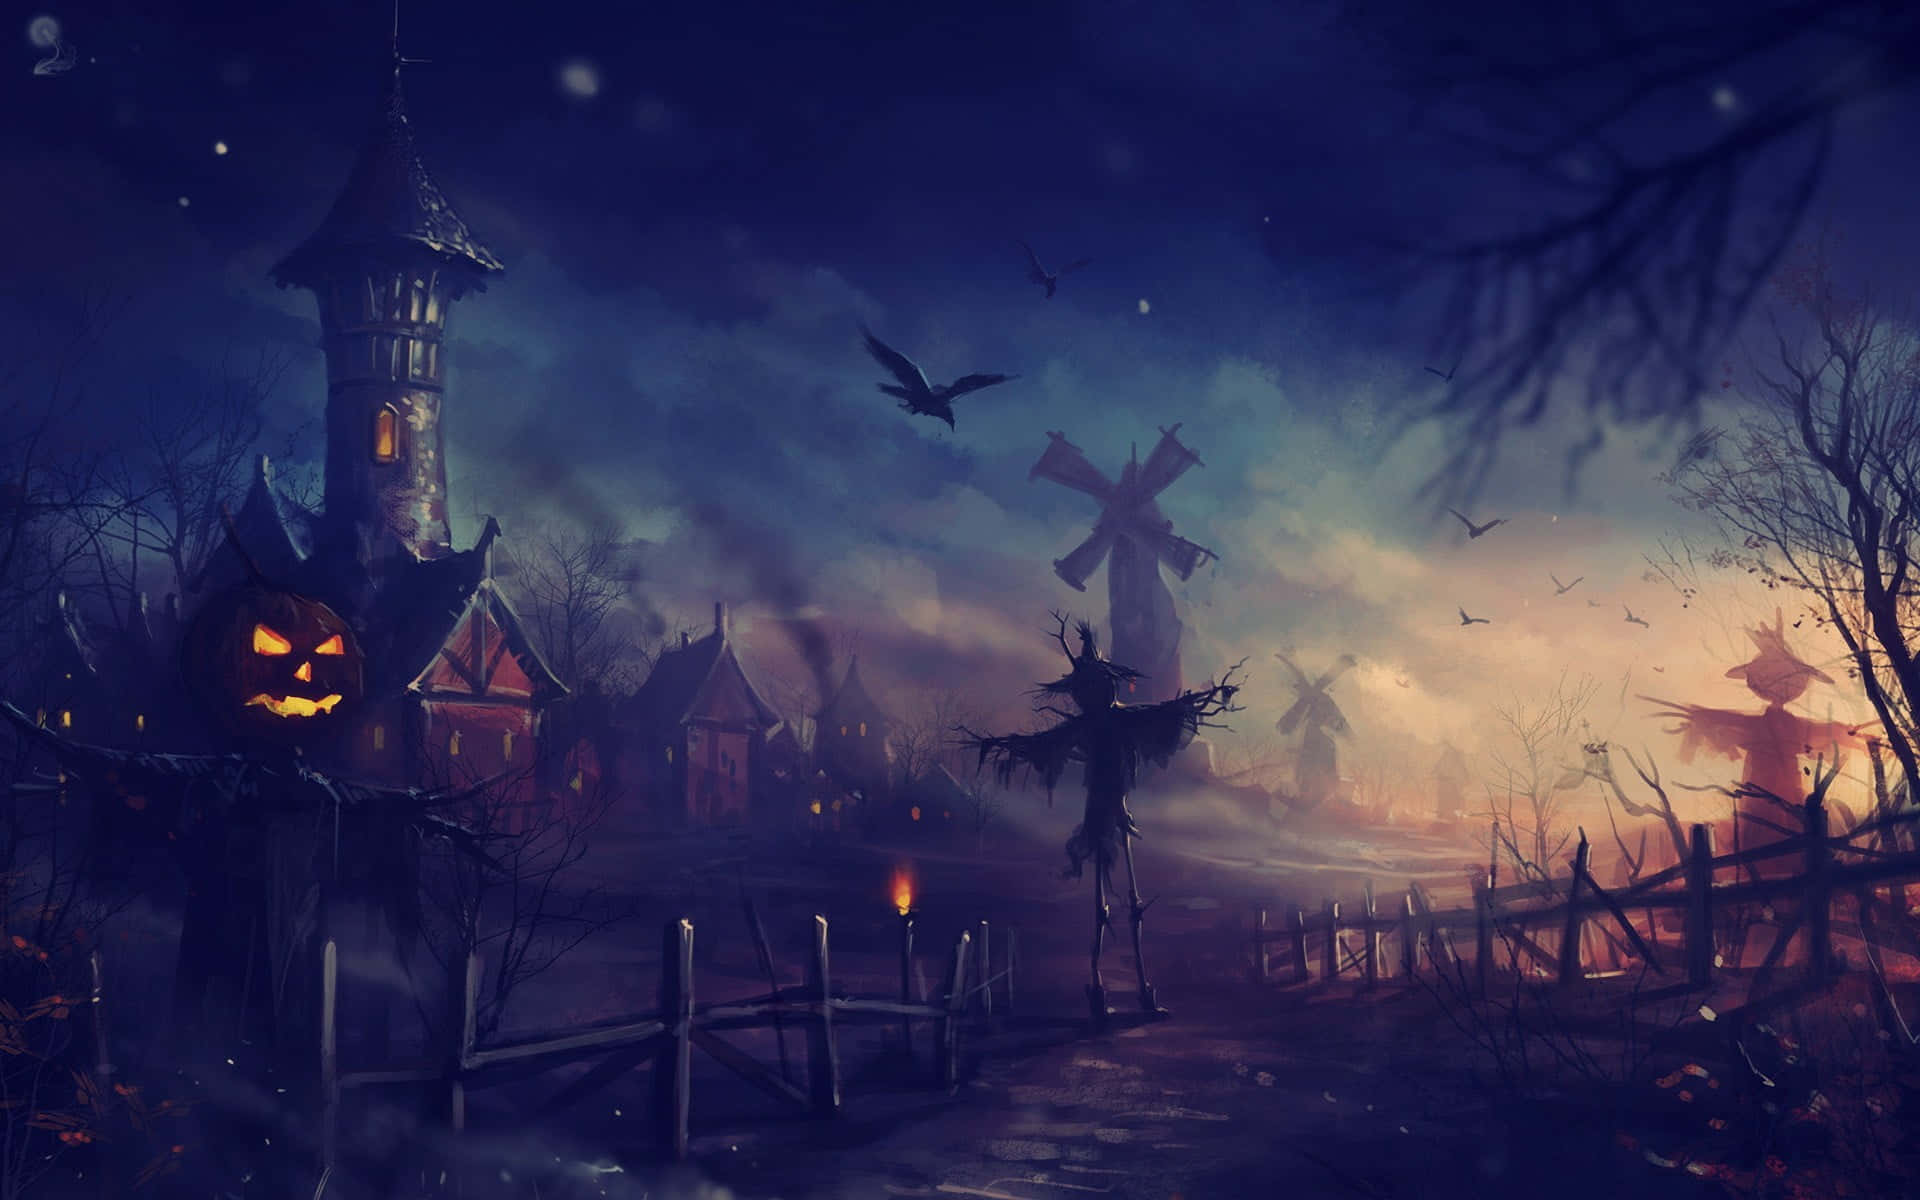 Spooky Halloween Night Scene with Haunted House Wallpaper